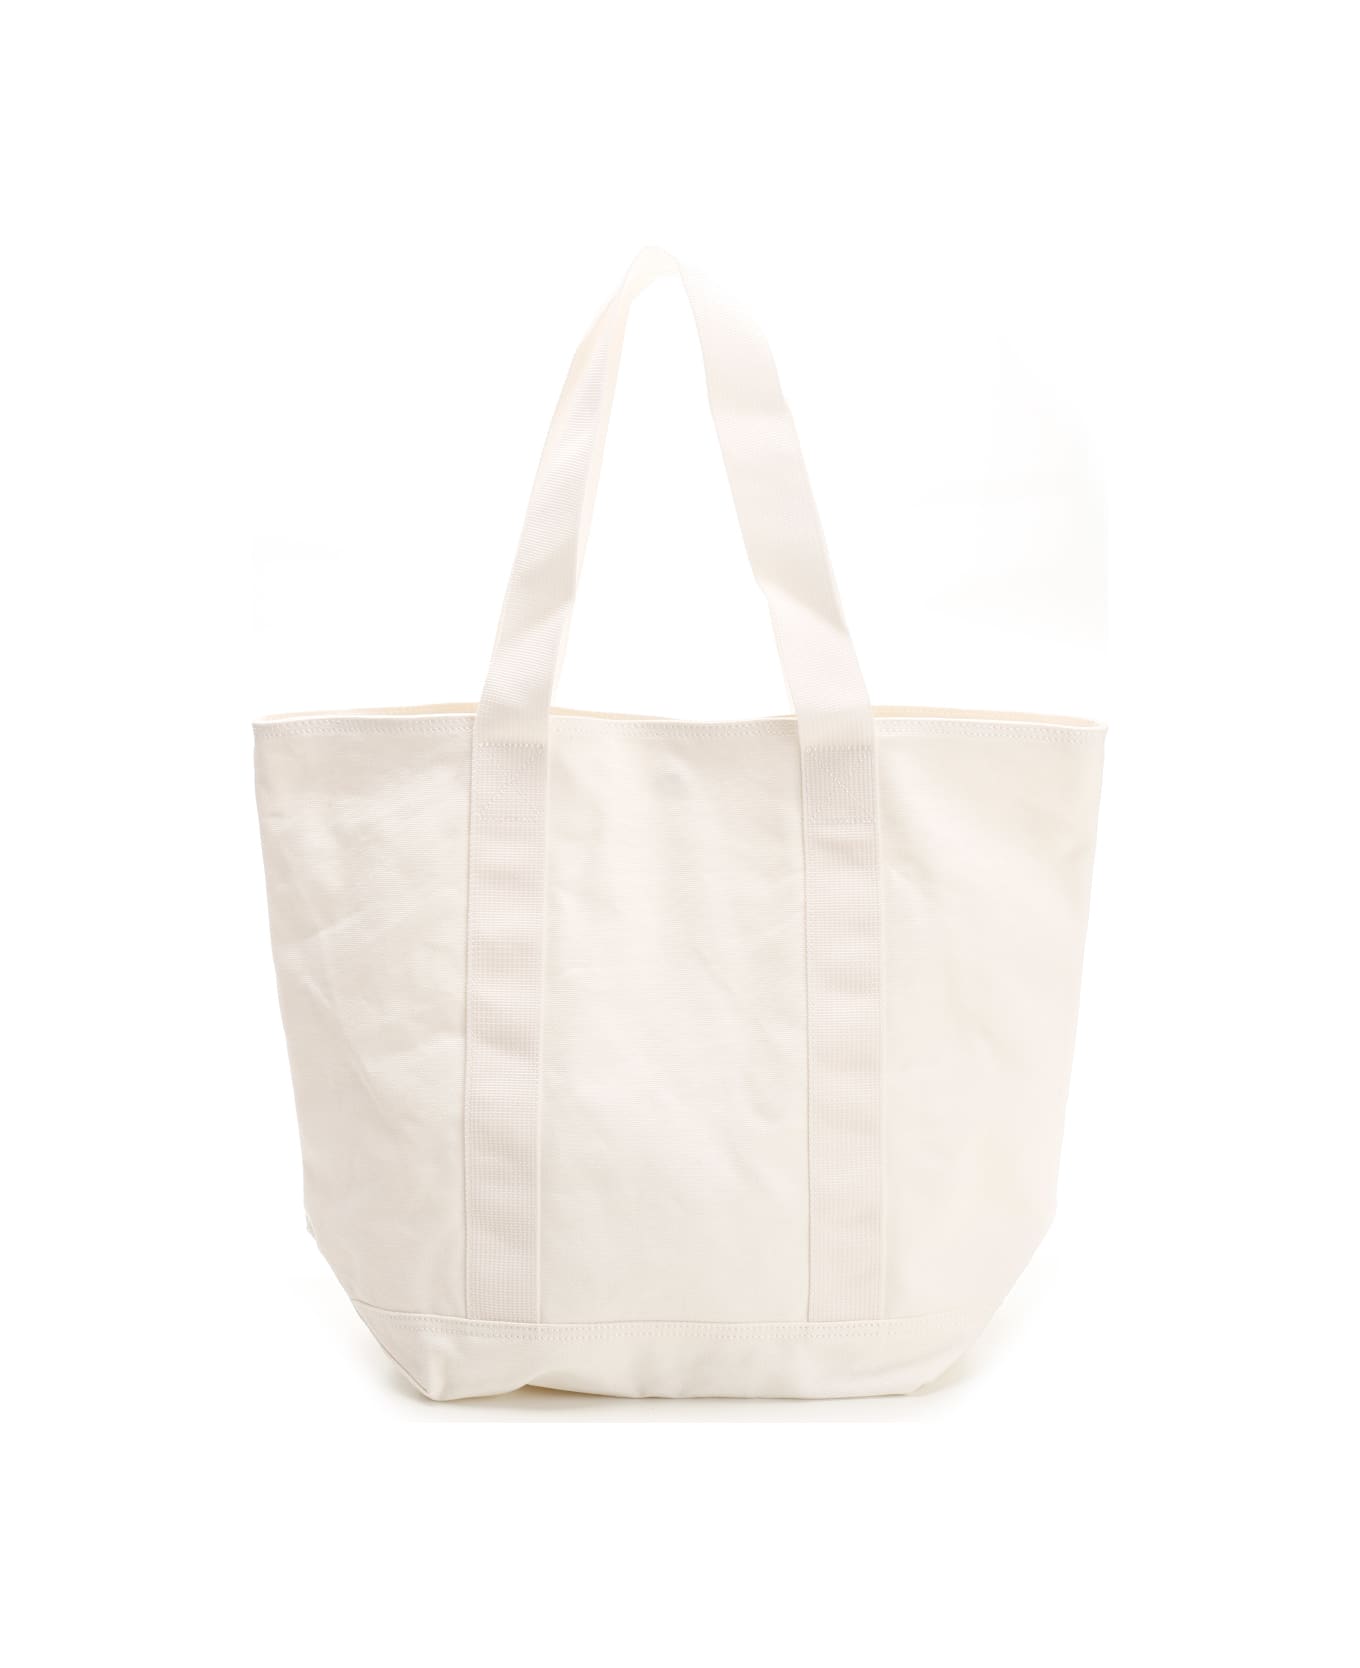 Carhartt 'dearborn' Canvas Tote Bag - WHITE トートバッグ